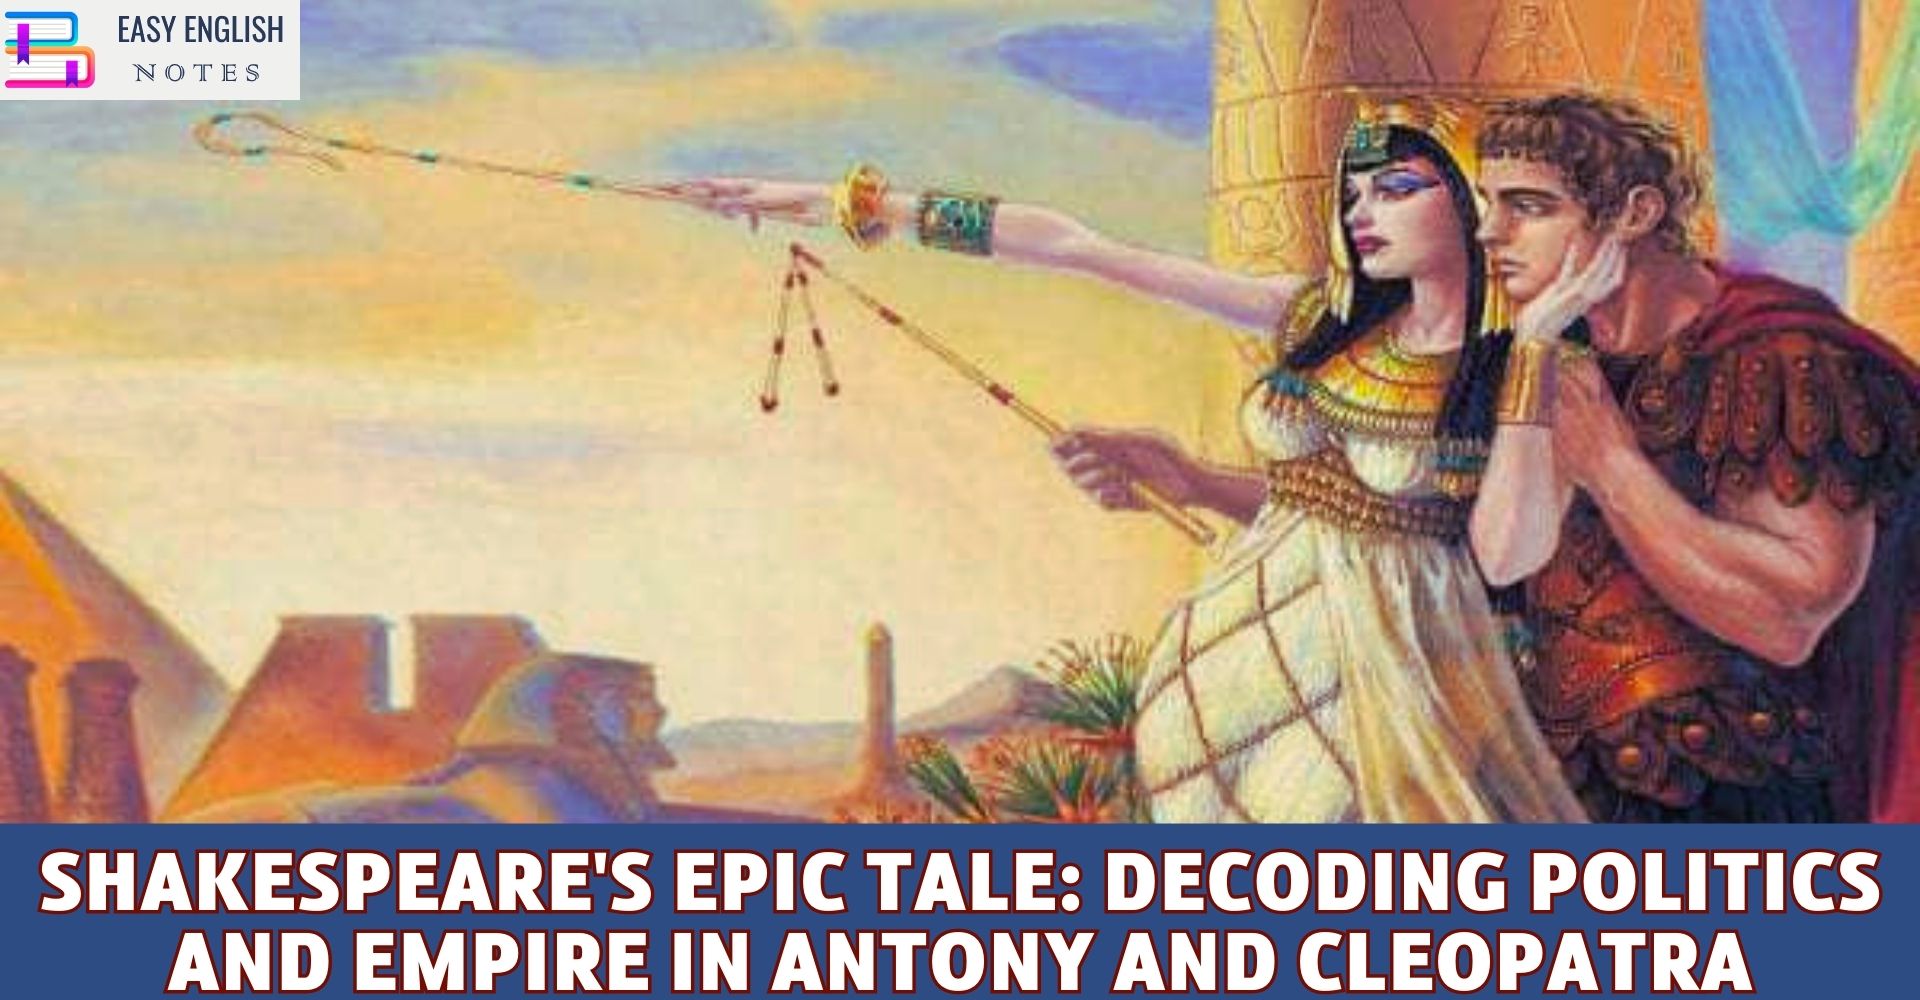 Shakespeare's Epic Tale: Decoding Politics and Empire in Antony and Cleopatra